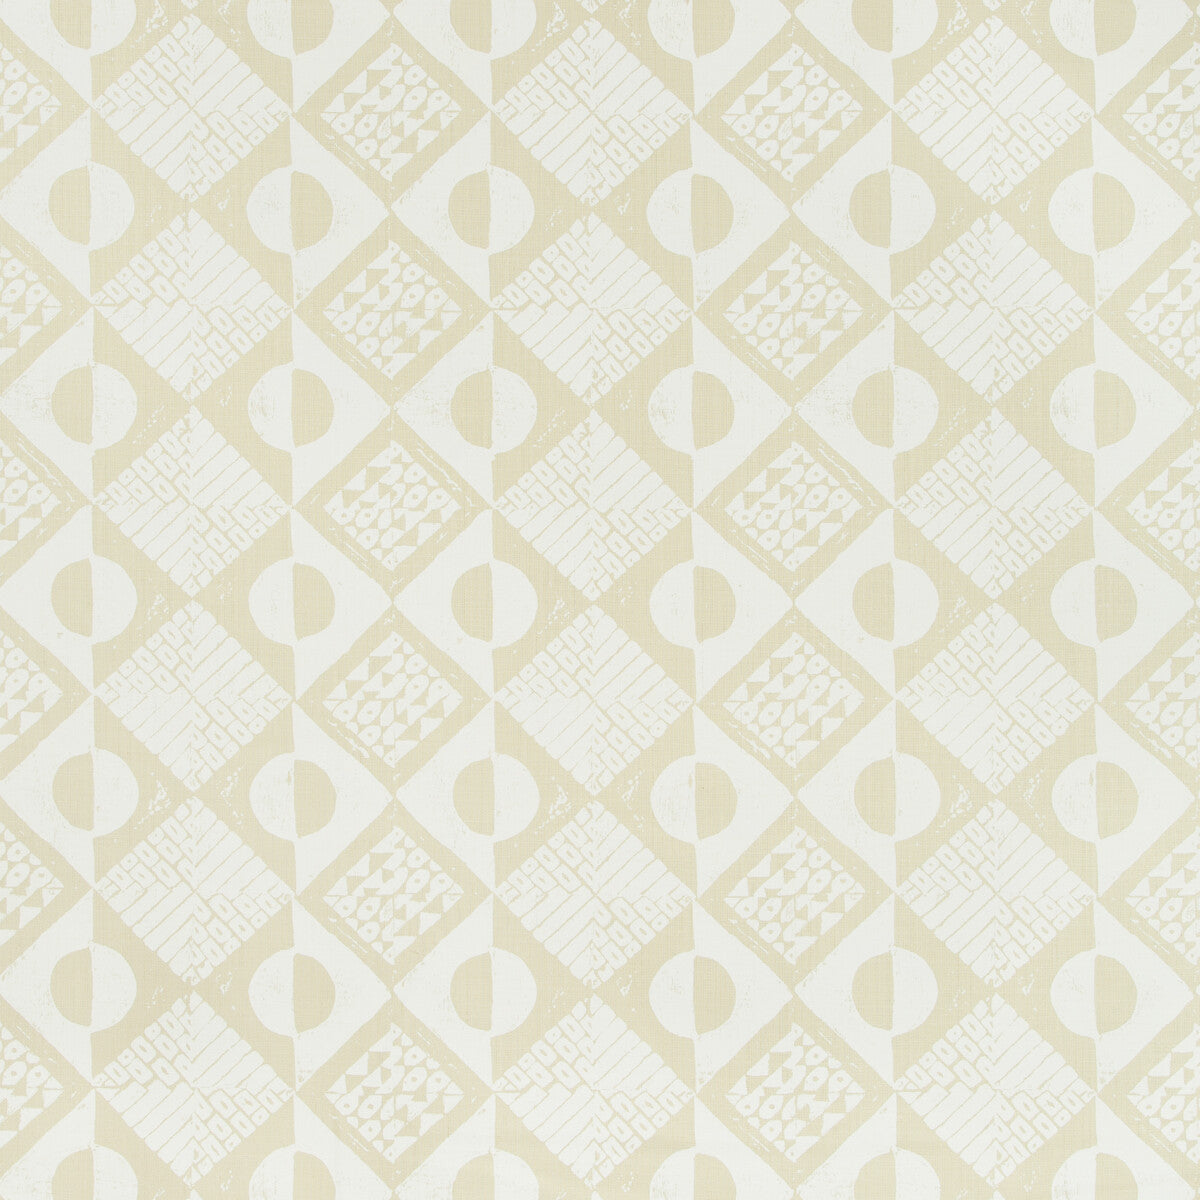 Circles And Squares fabric in off white color - pattern BFC-3666.1.0 - by Lee Jofa in the Blithfield collection